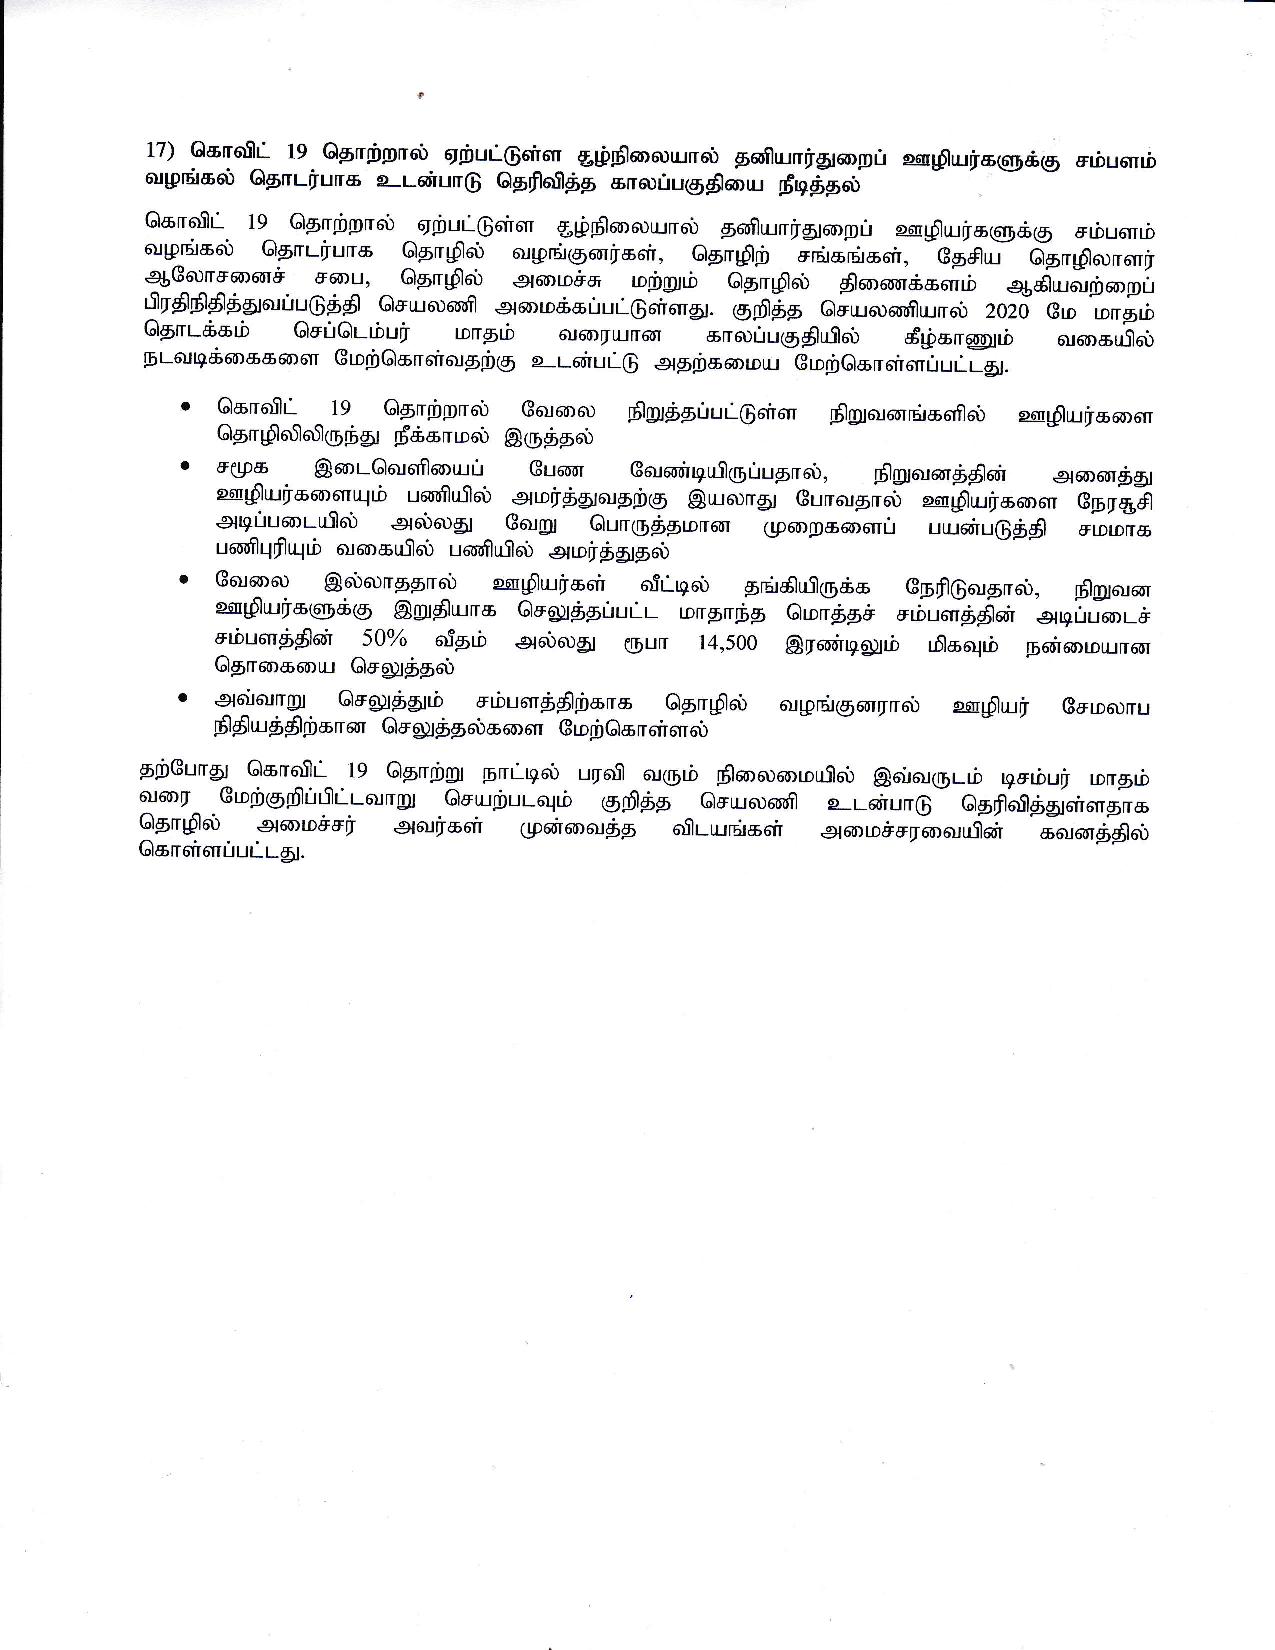 Cabinet Decision on 26.10.2020 Tamil page 006